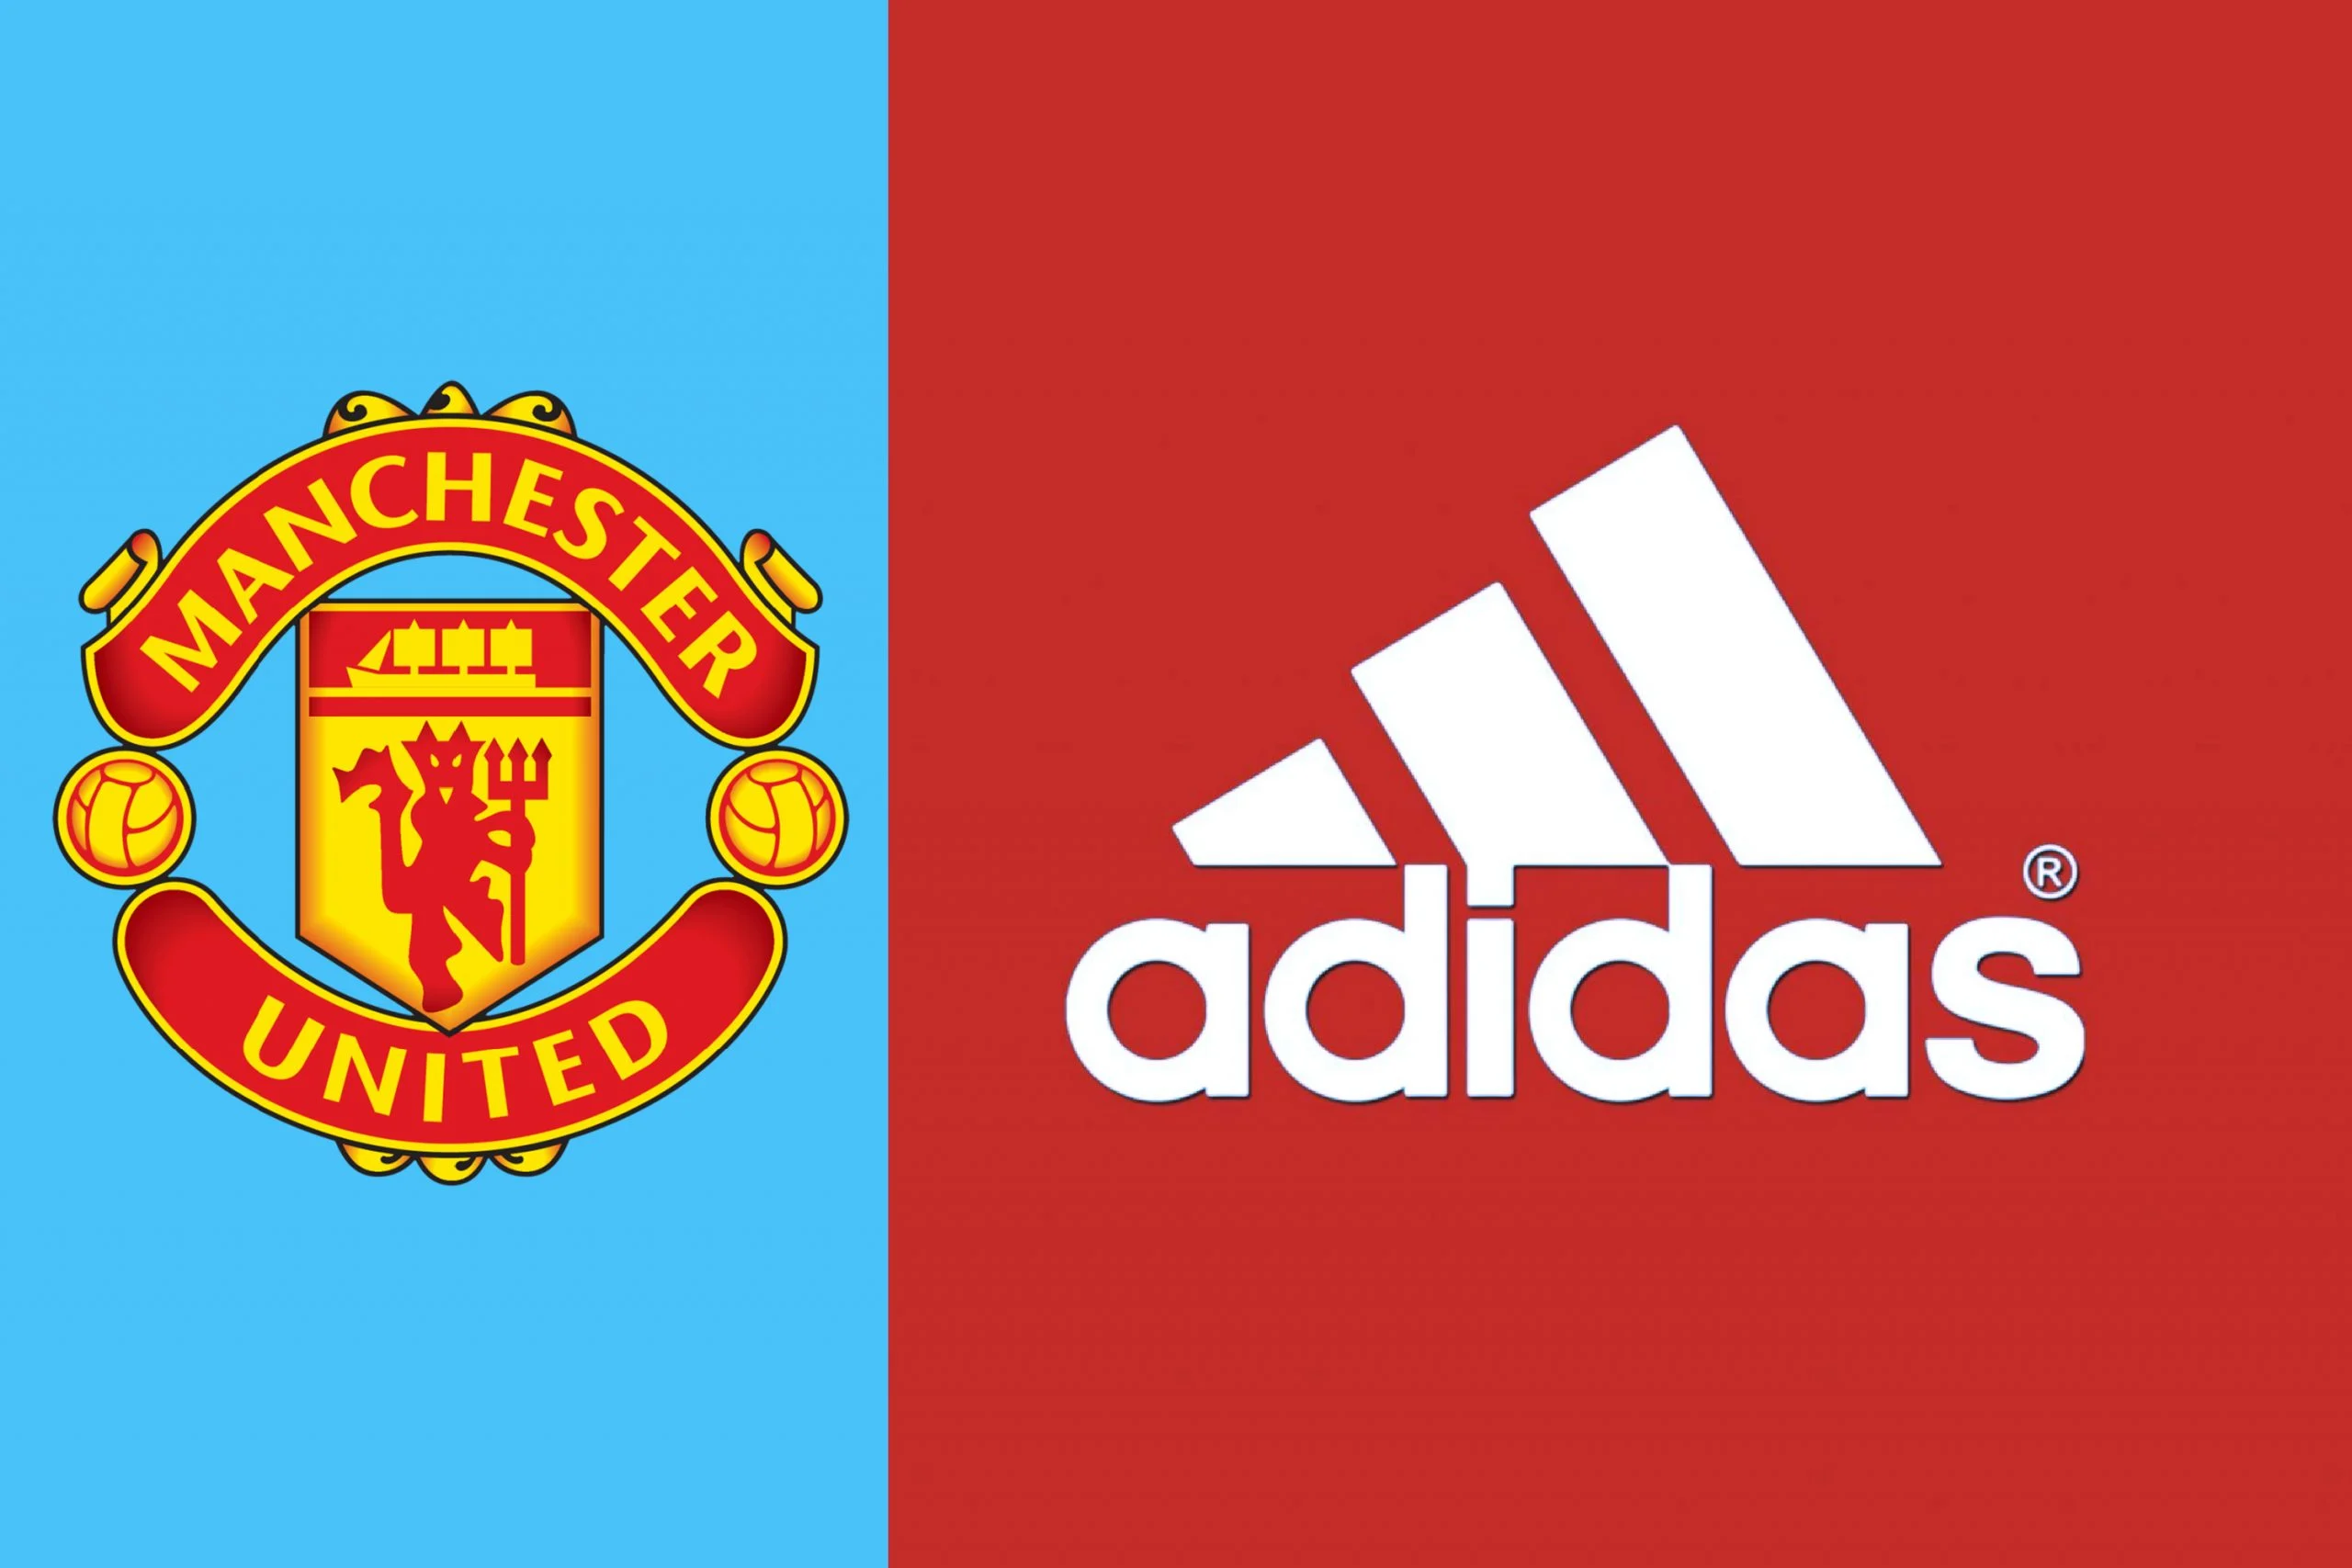 Manchester United and Adidas logos side by side